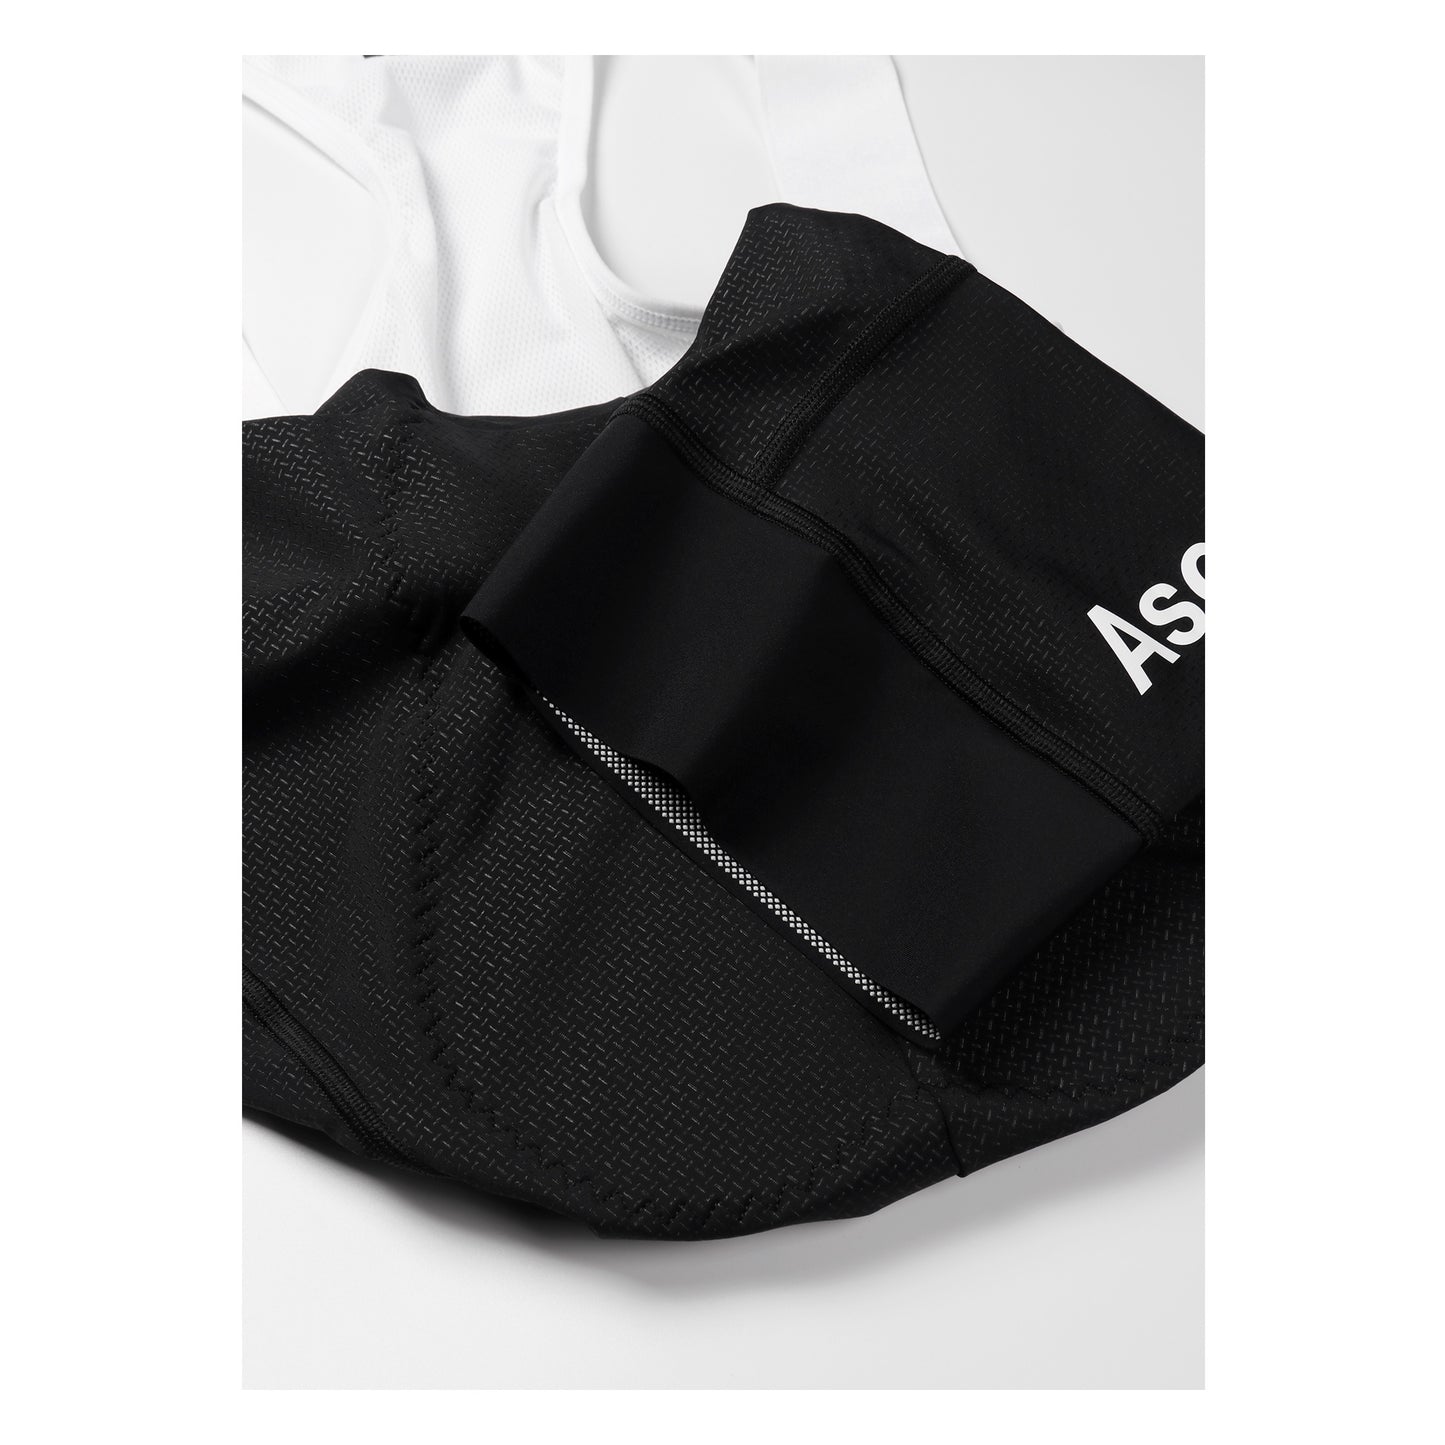 Legend Men Bib Short Black by Ascender Cycling Club Zürich in Switzerland Silicon Injected Leg Grippers View